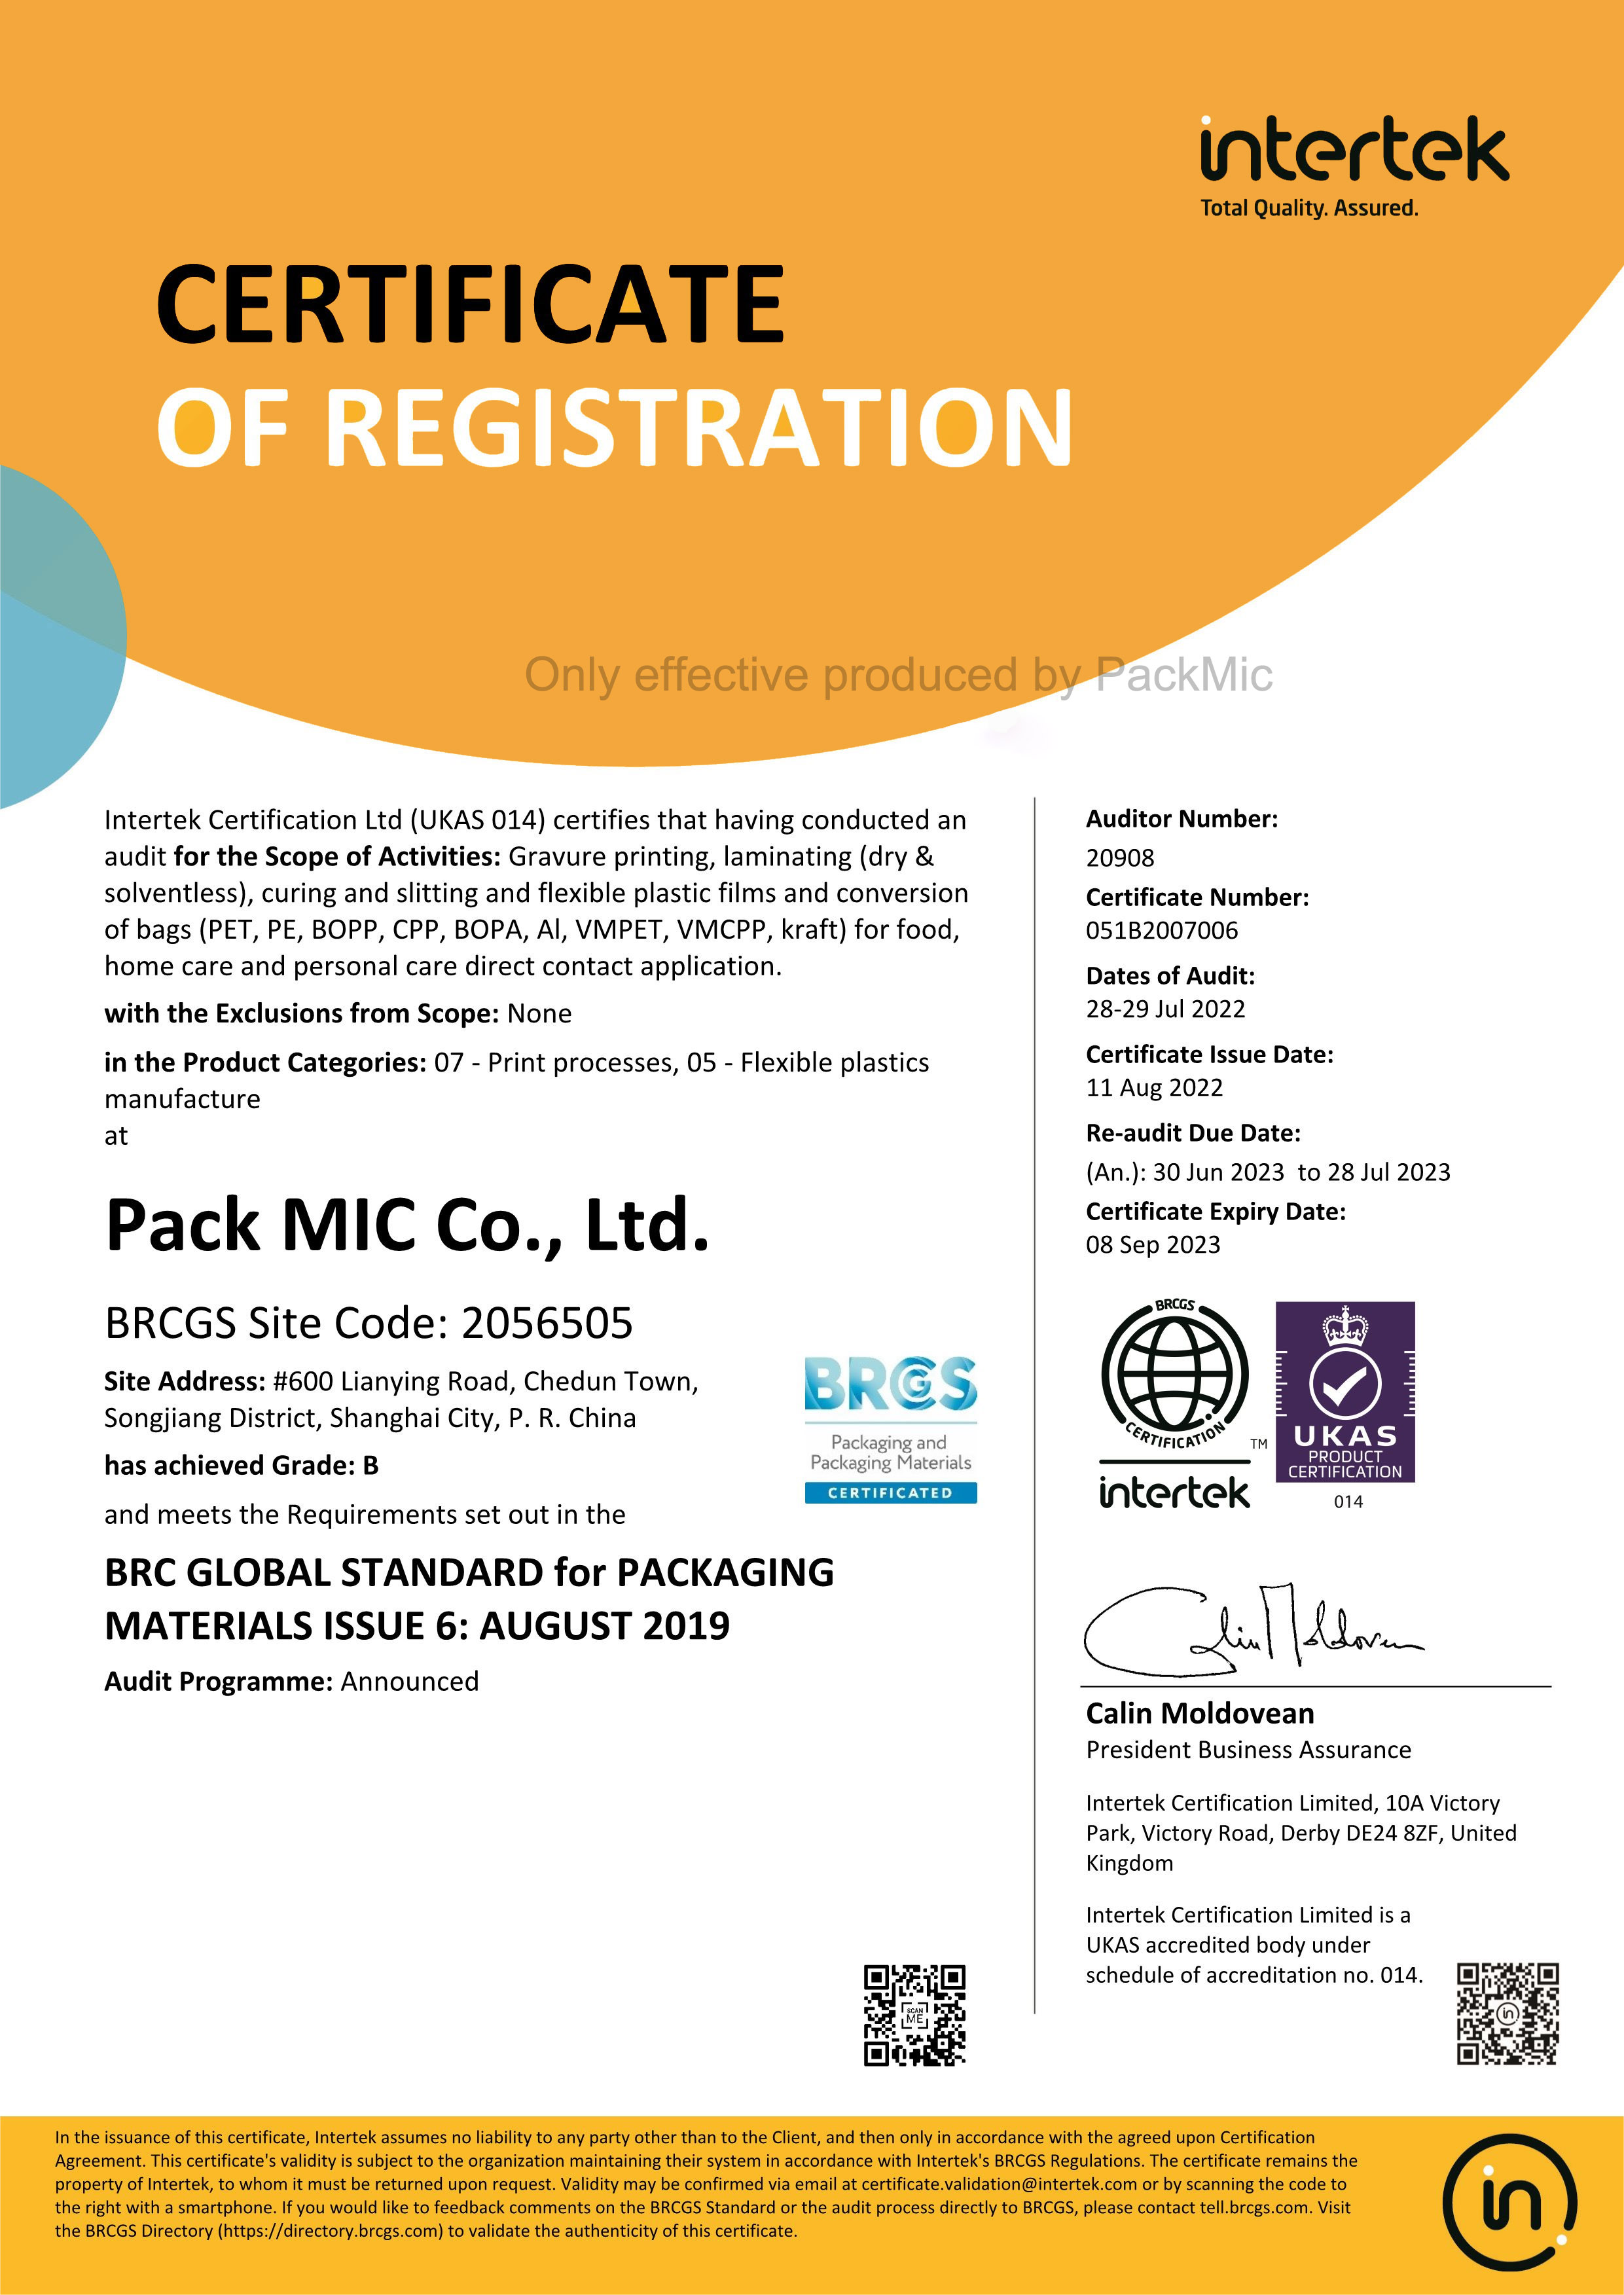 Packmic has passed the annual audit of intertet. Got our new certificate of BRCGS.